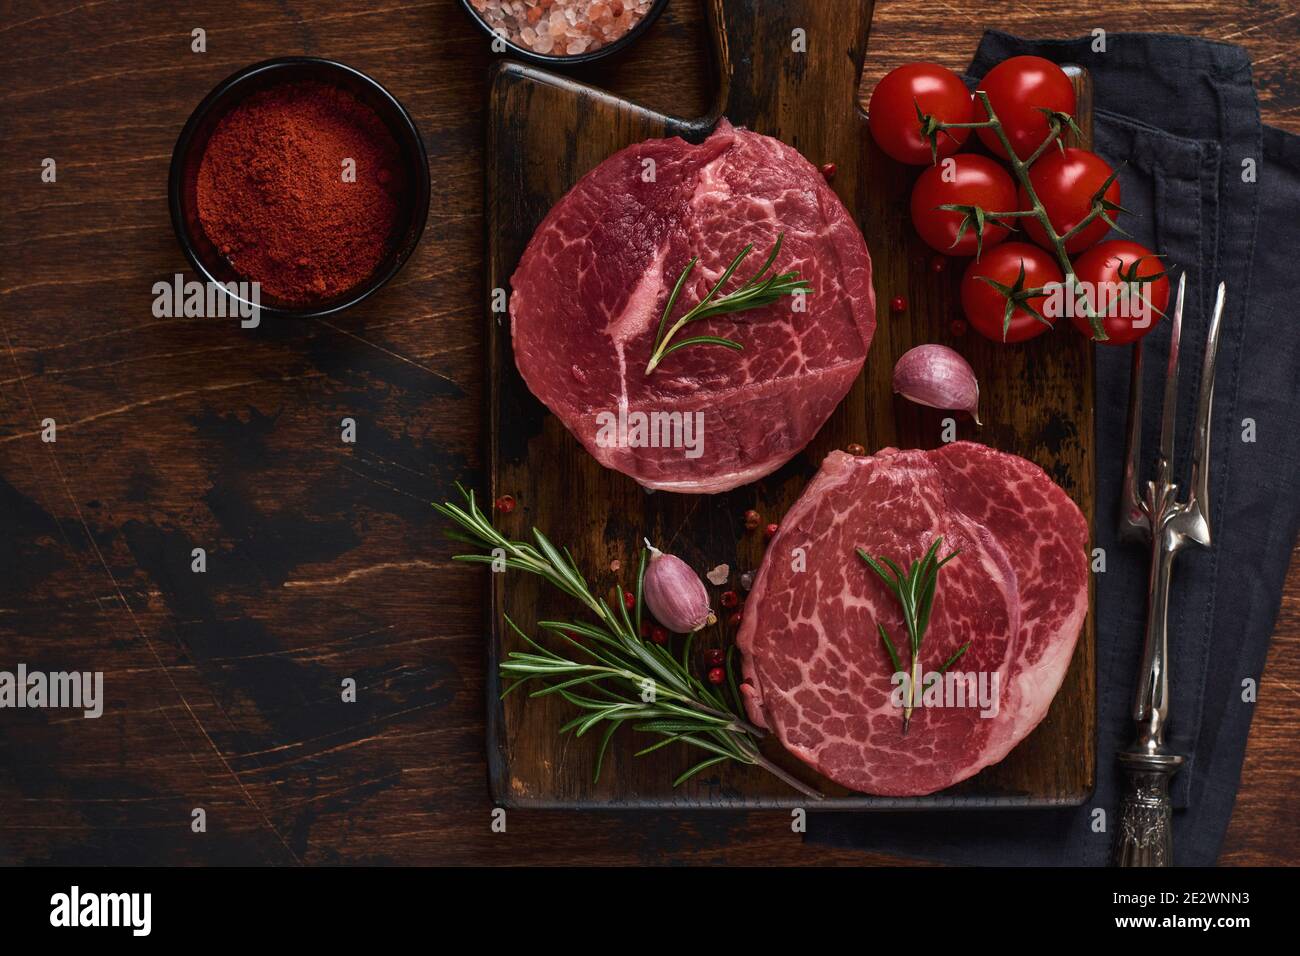 Two fresh Parisienne raw steak on wooden Board with salt, pepper and rosmary in a rustic style on old wooden background. Black angus. Stock Photo